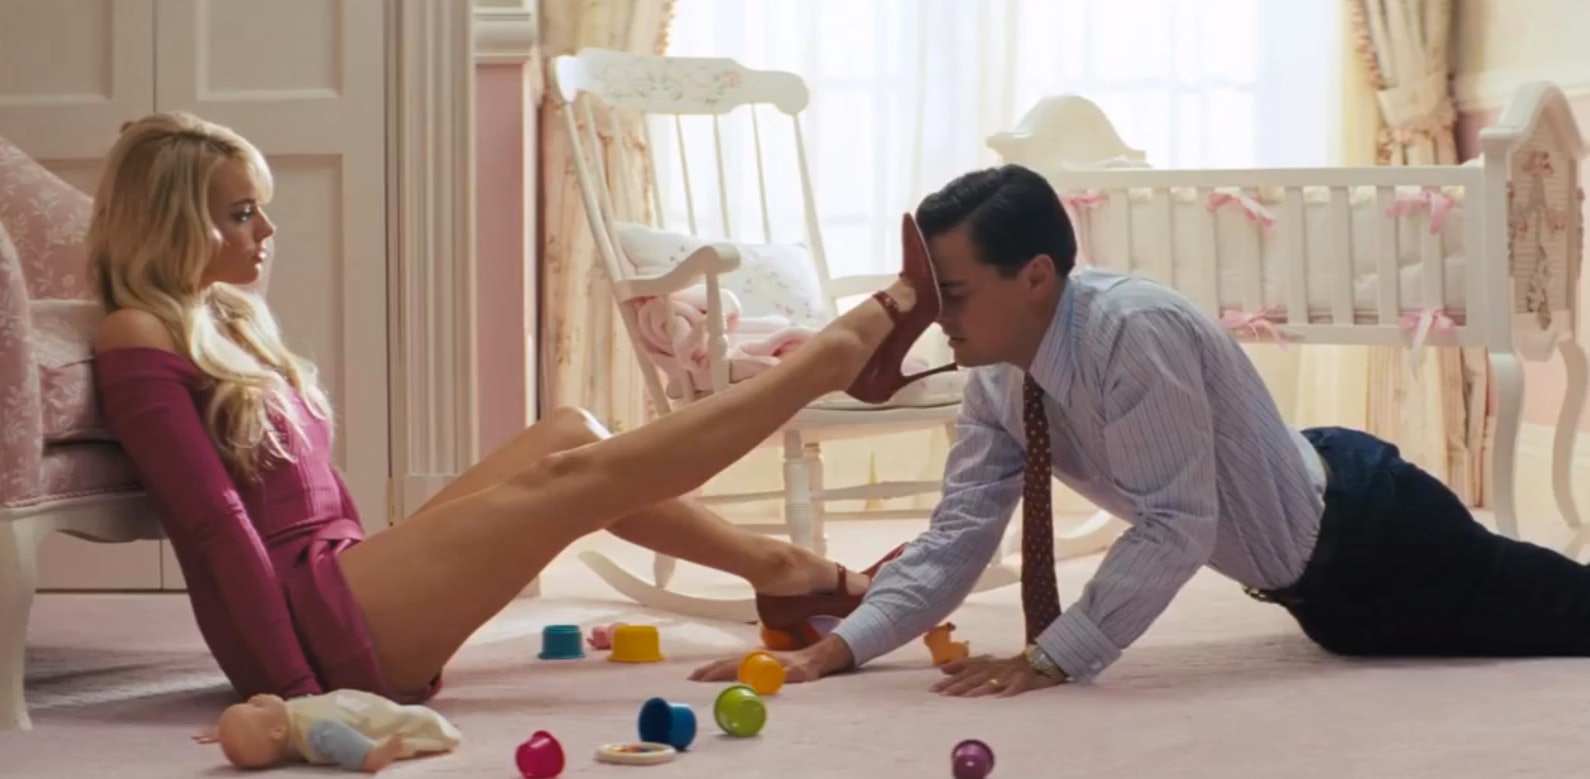 the wolf of wall street movie scenes